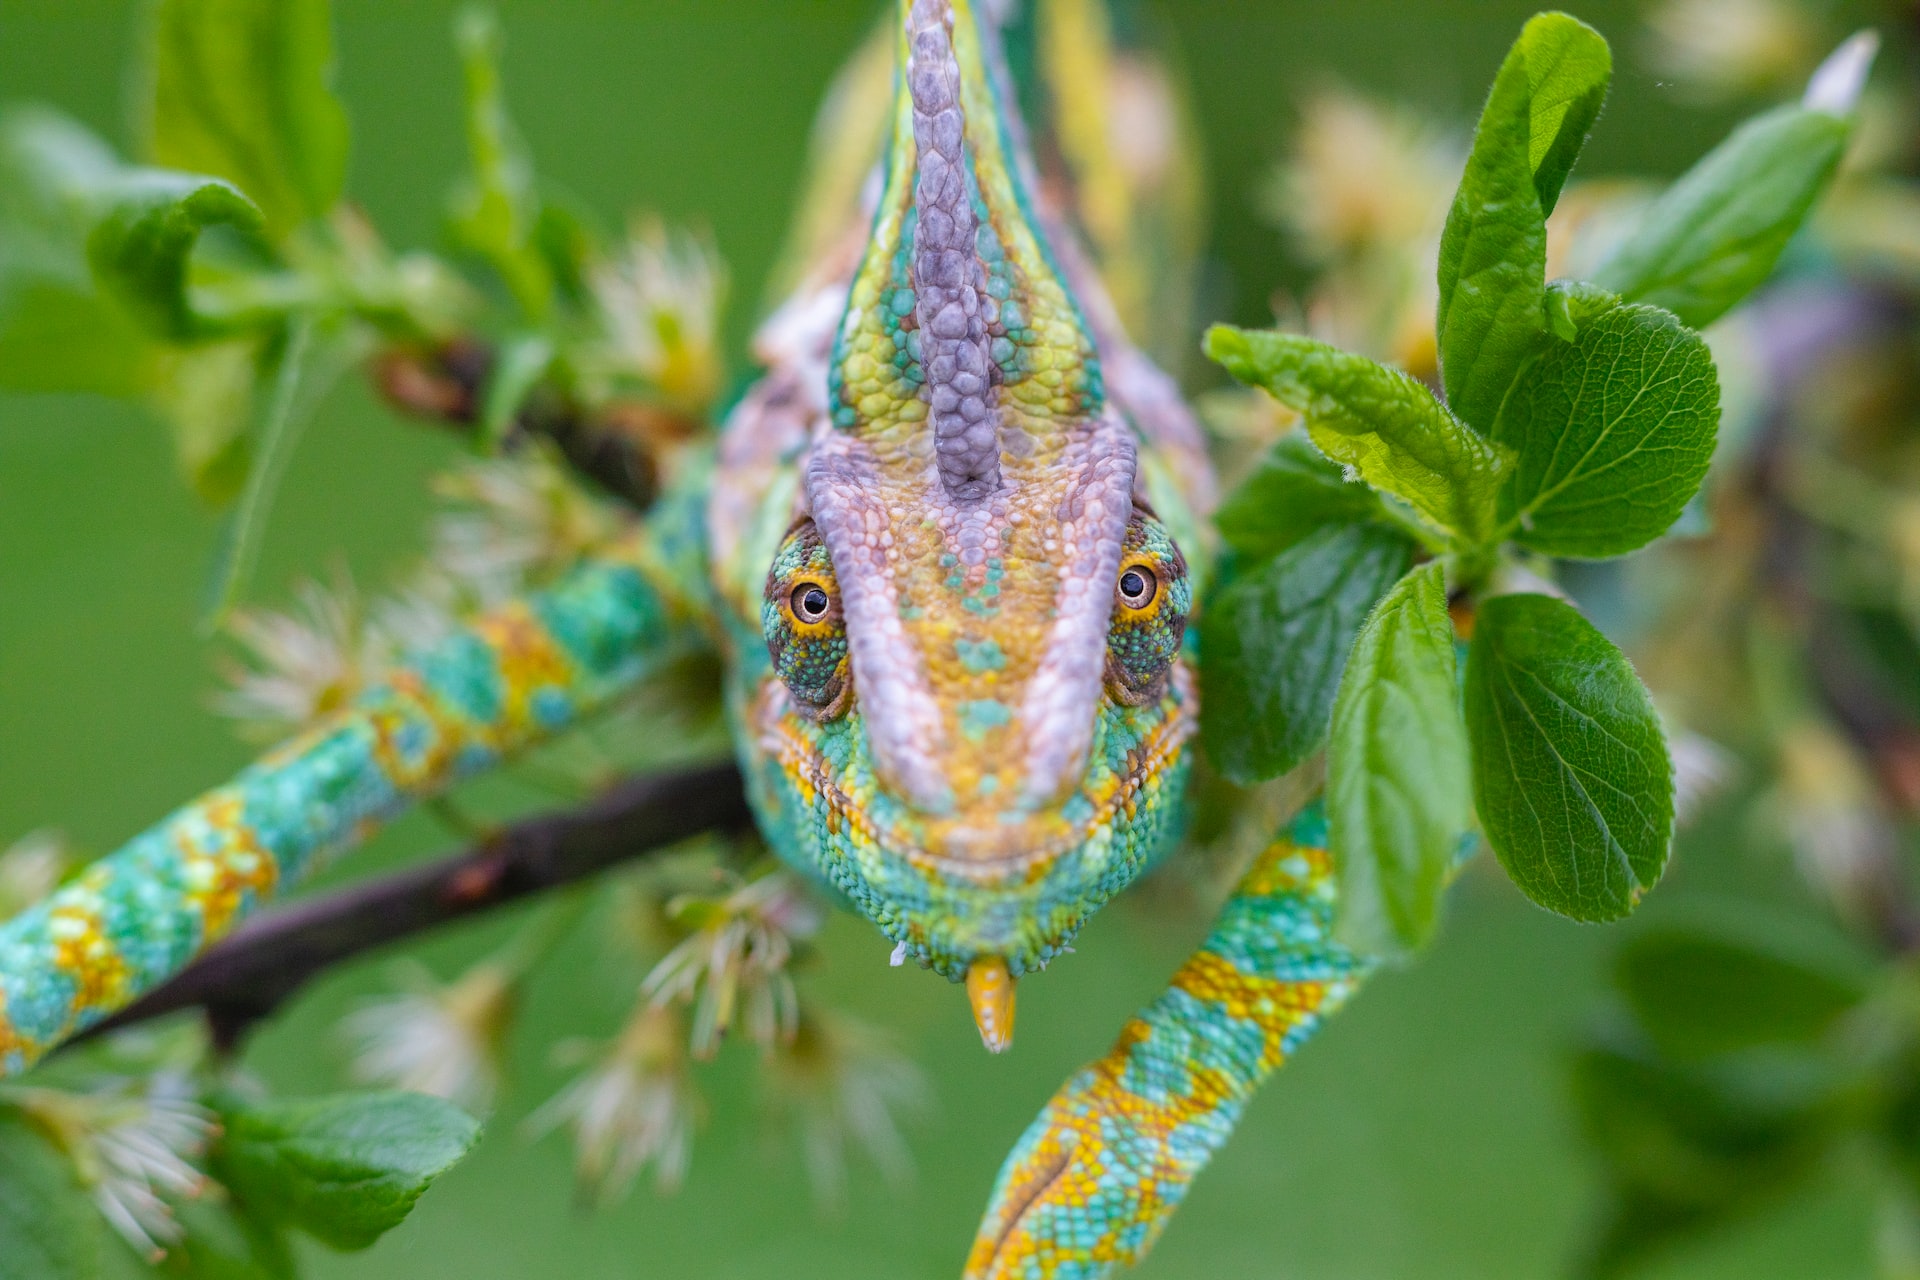 green and blue dragon on tree branch